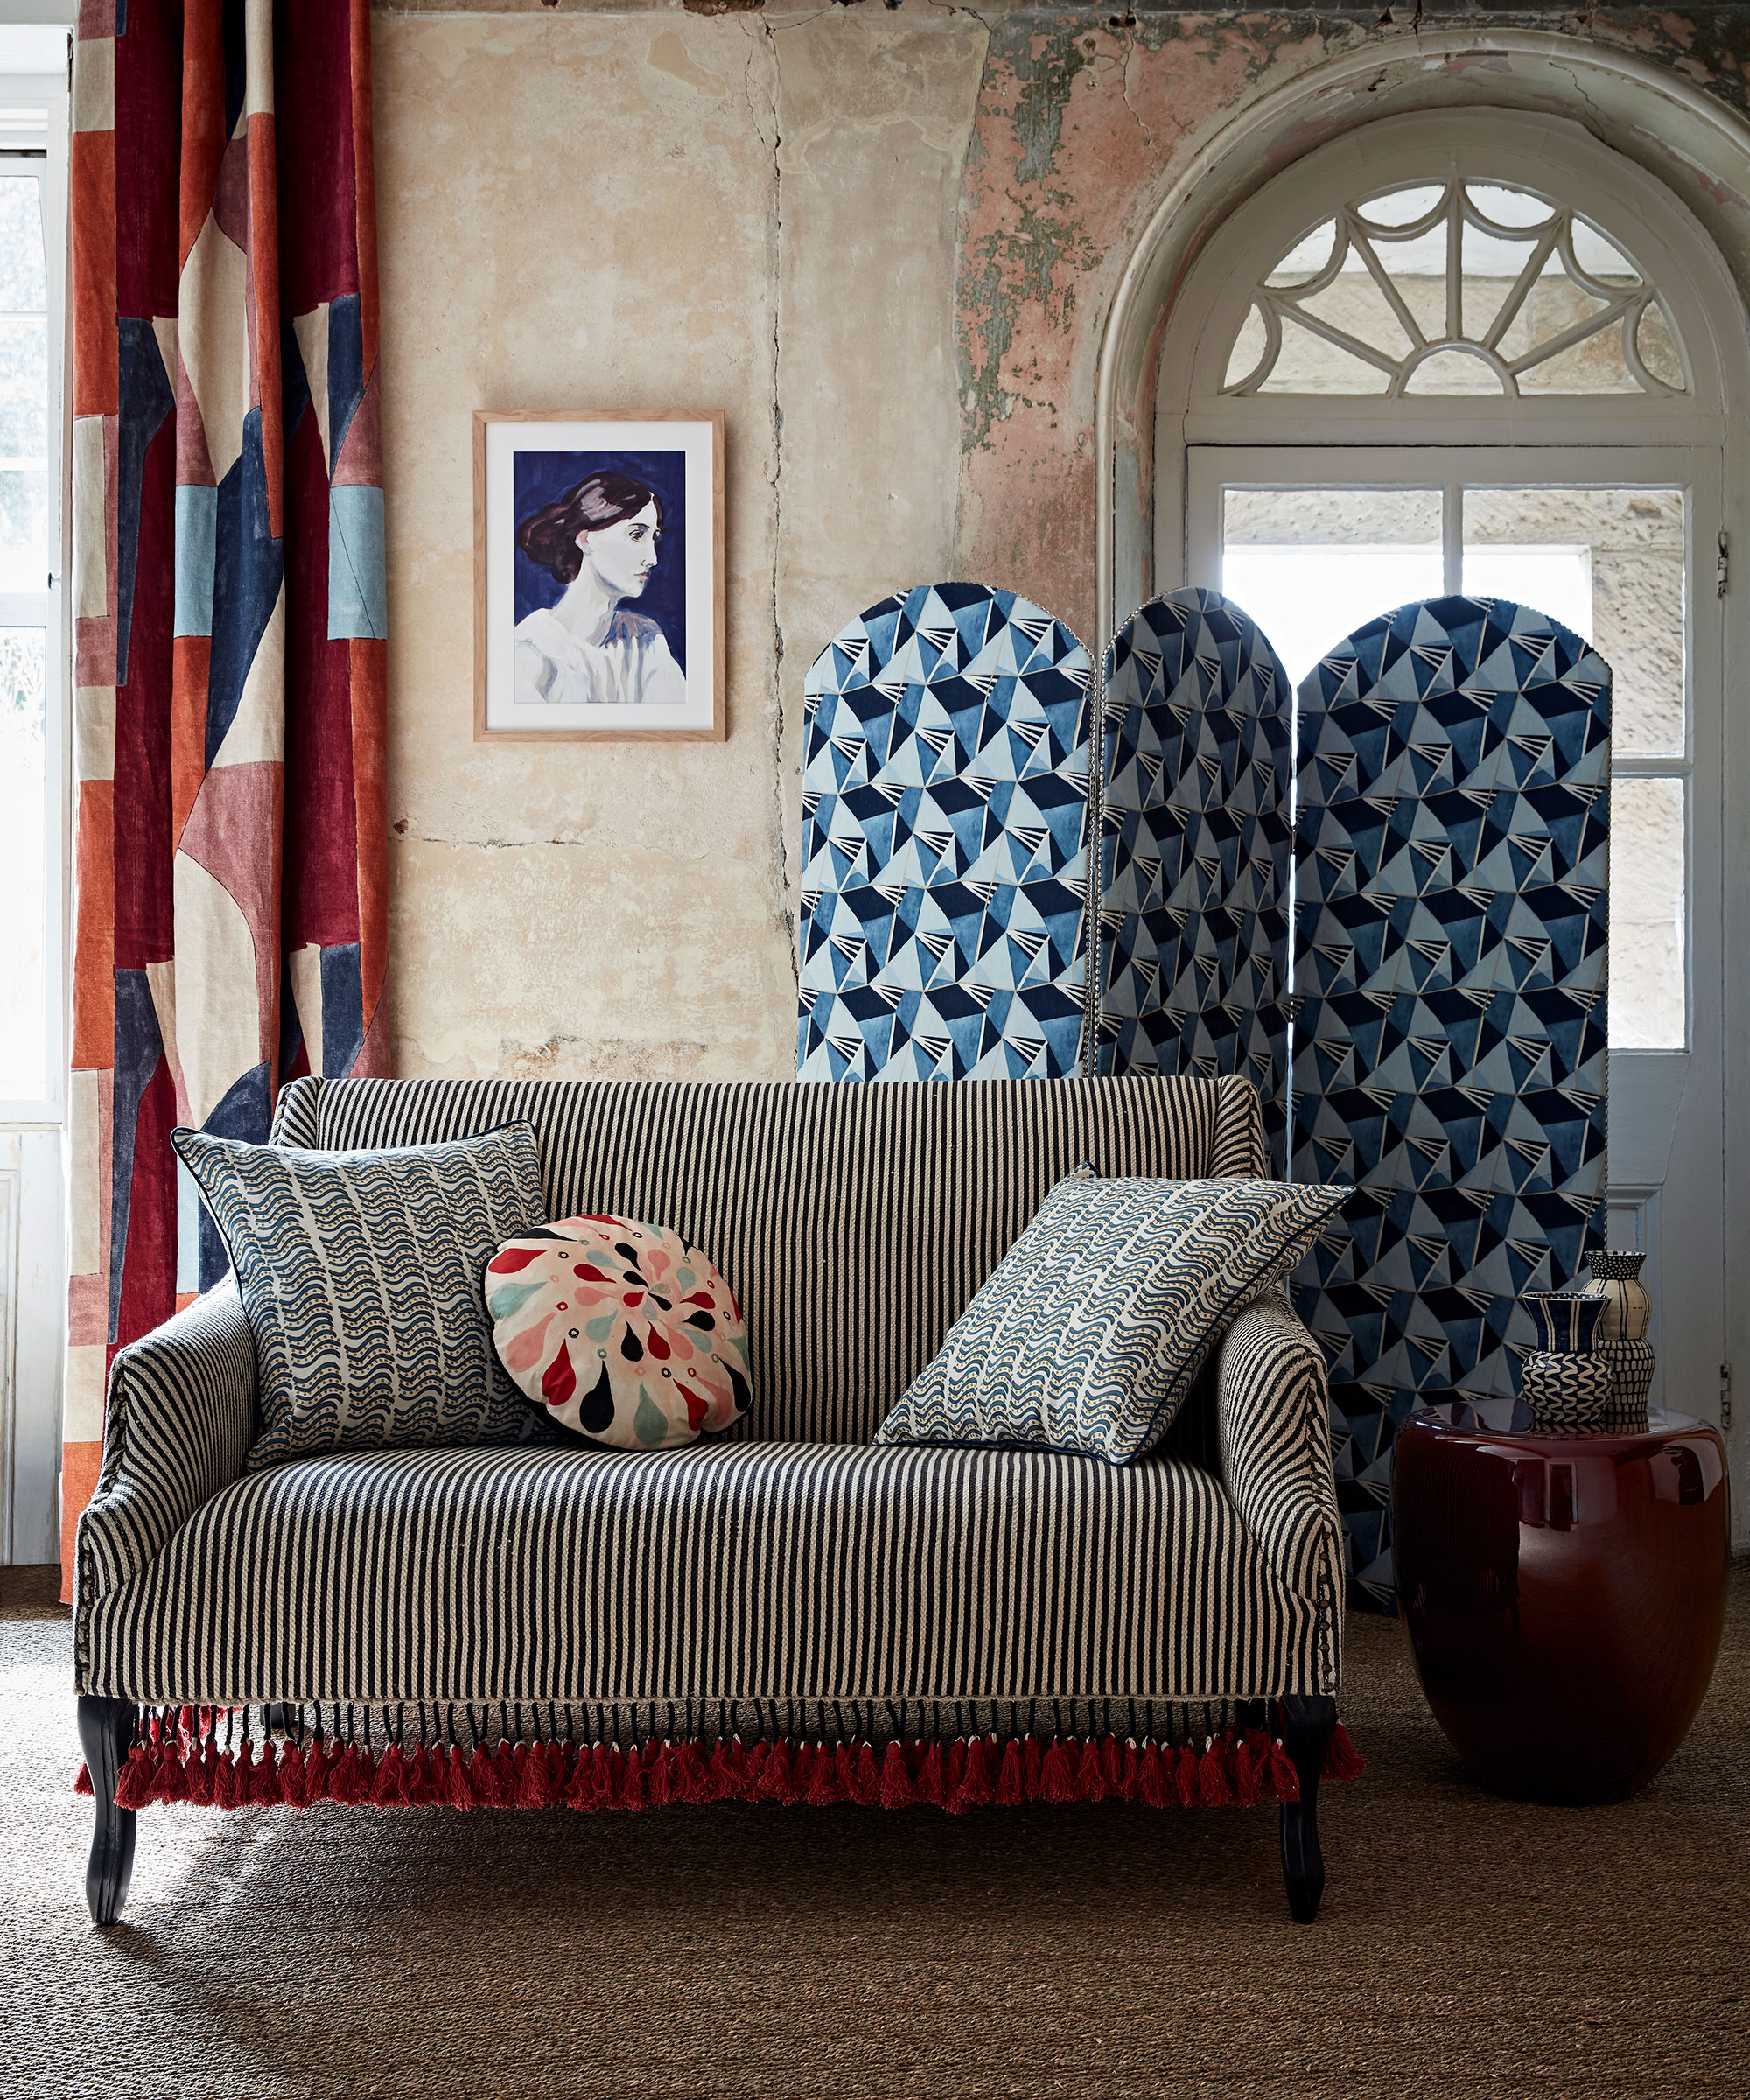 Compact furniture upholstered in patterned fabric